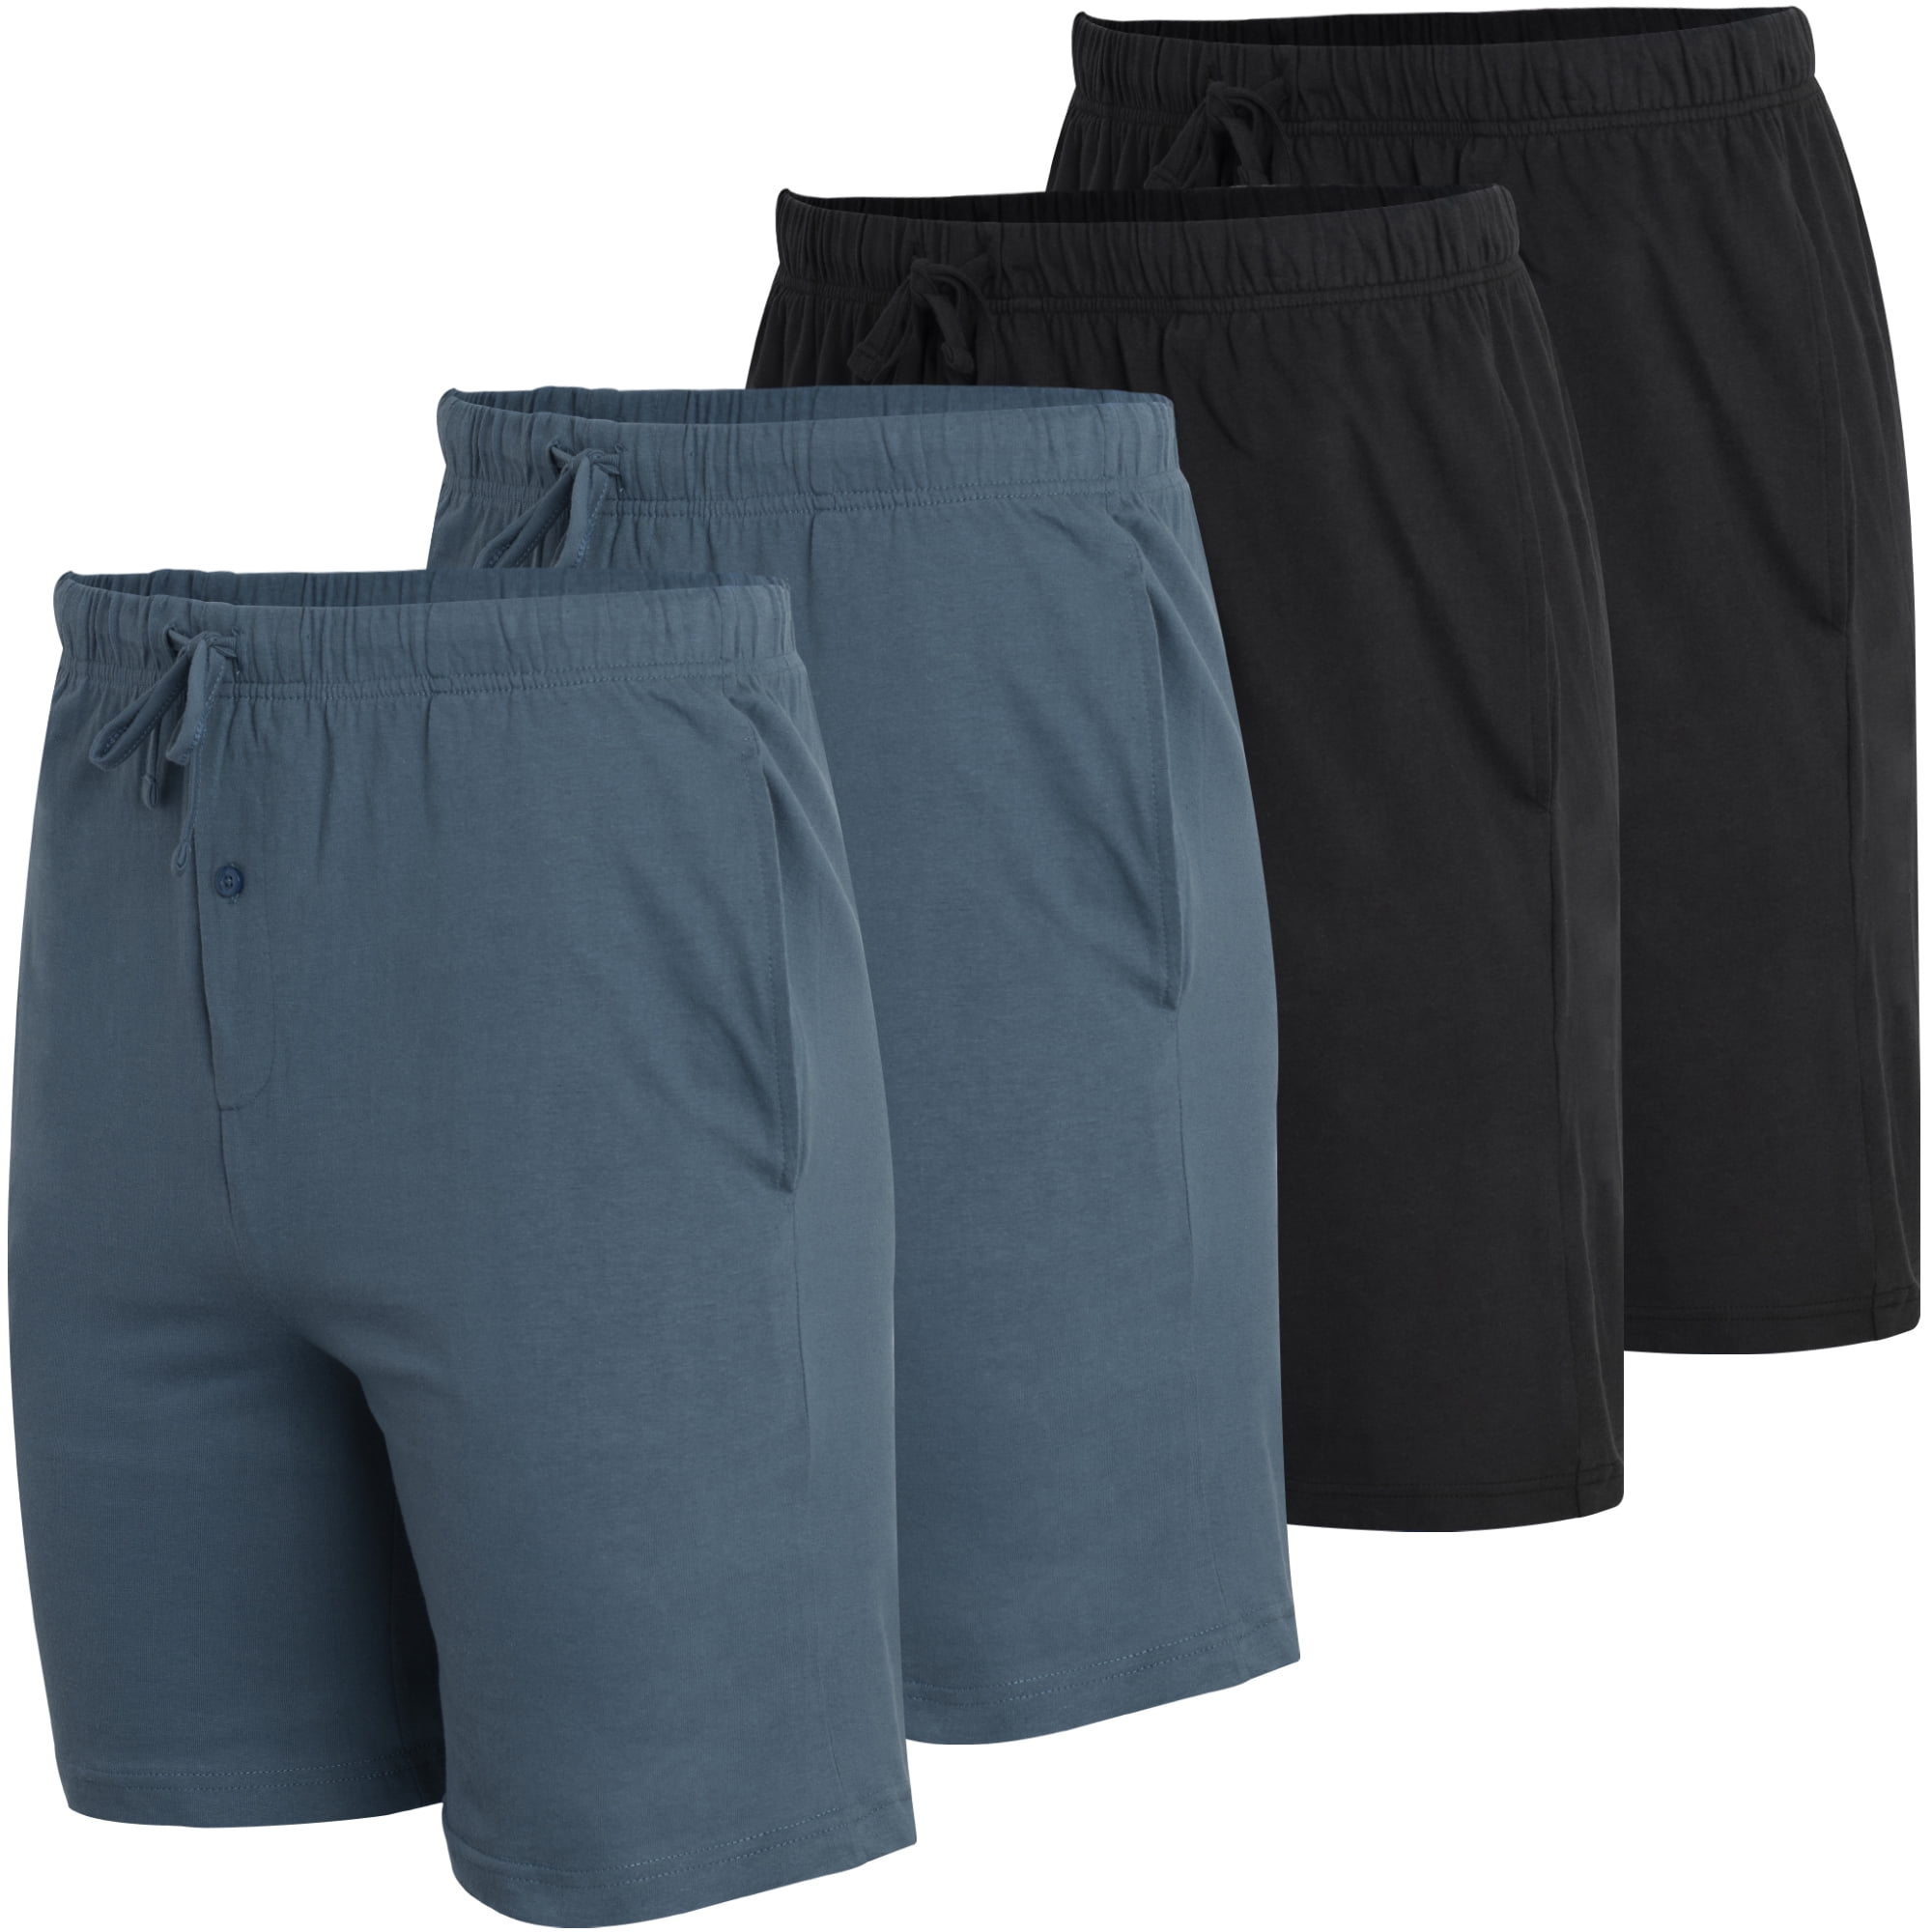 Real Essentials Men's 4-Pack Soft Knit Sleep Shorts, Sizes S-3XL